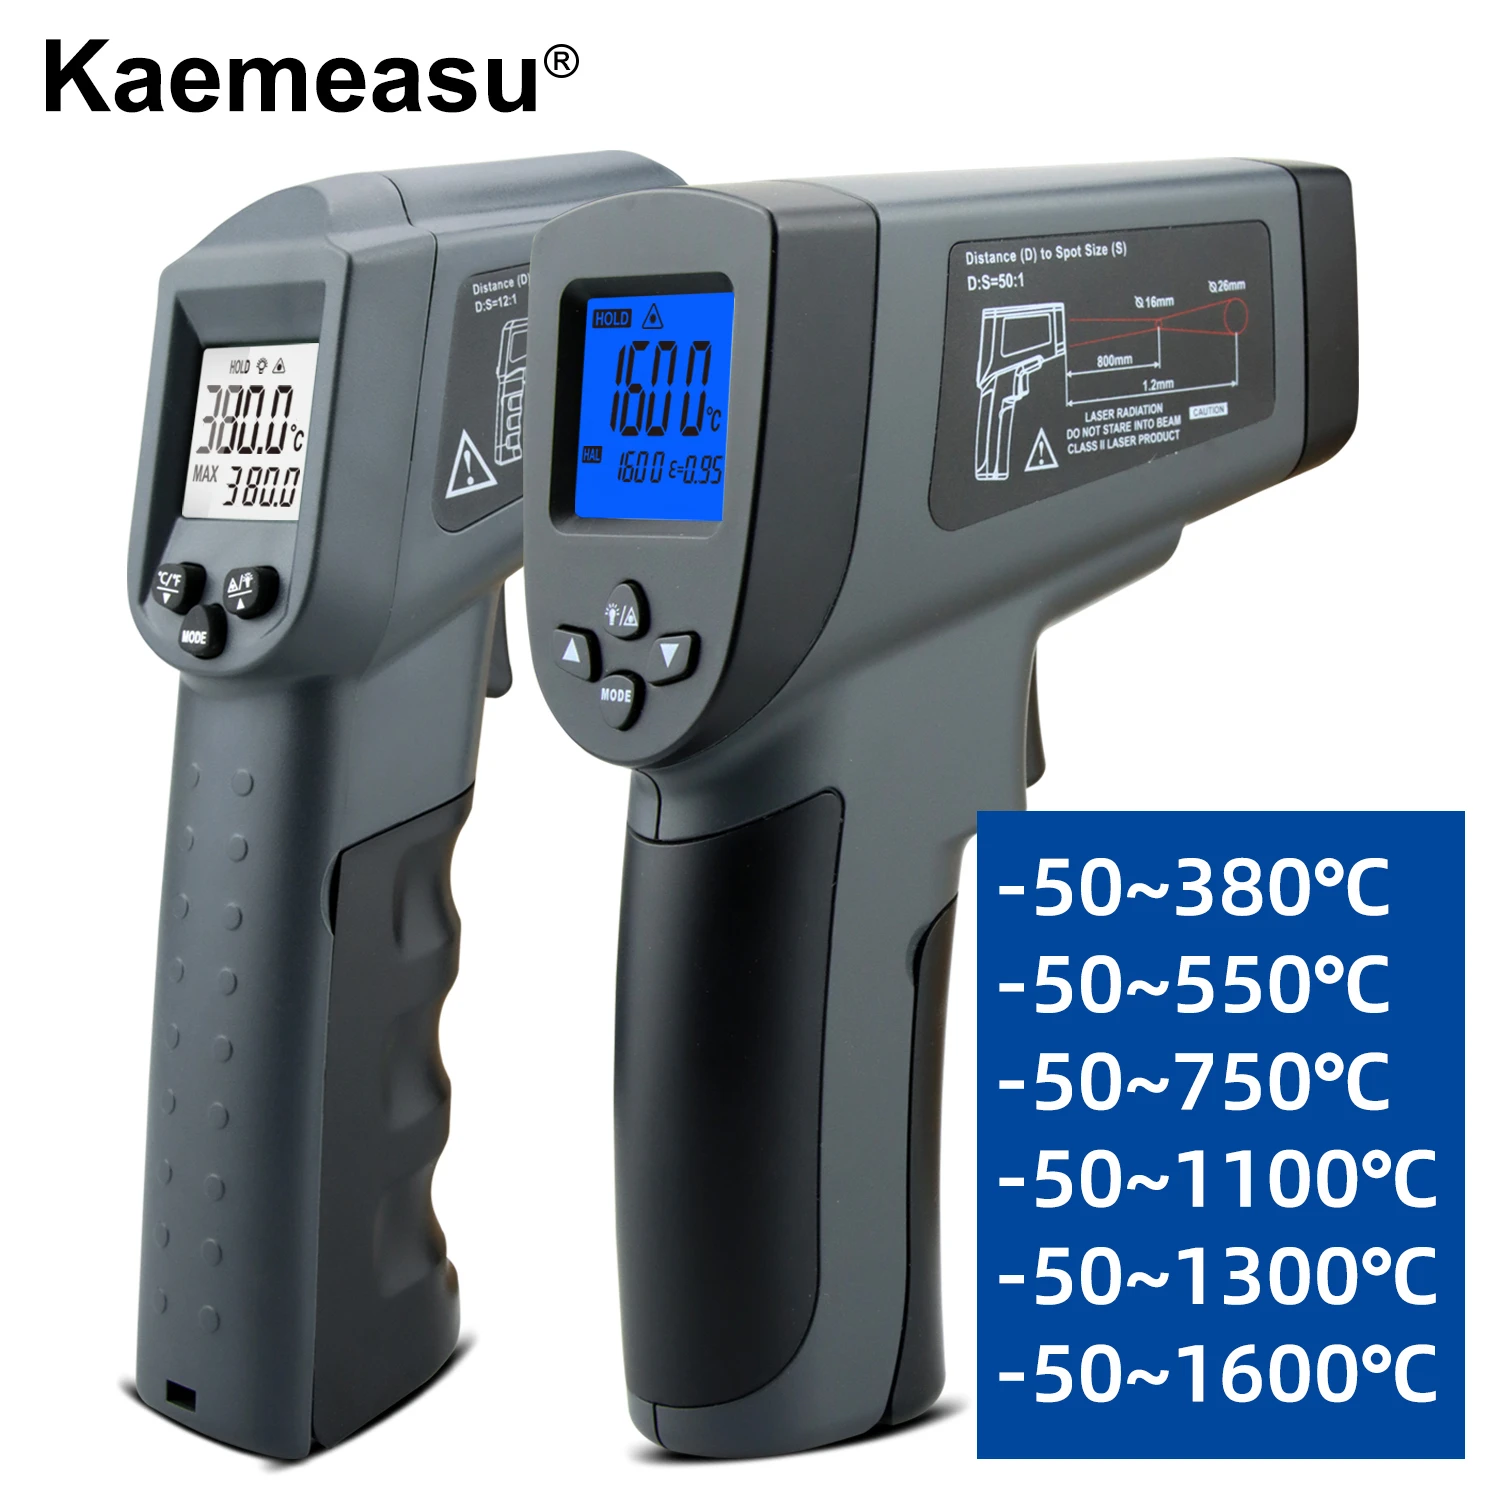 Kaemeasu Digital Infrared Thermometer -50~1600 Measuring Range,Non-Contact, Safety,Cooking,Industrial Electronic Thermometer Gun